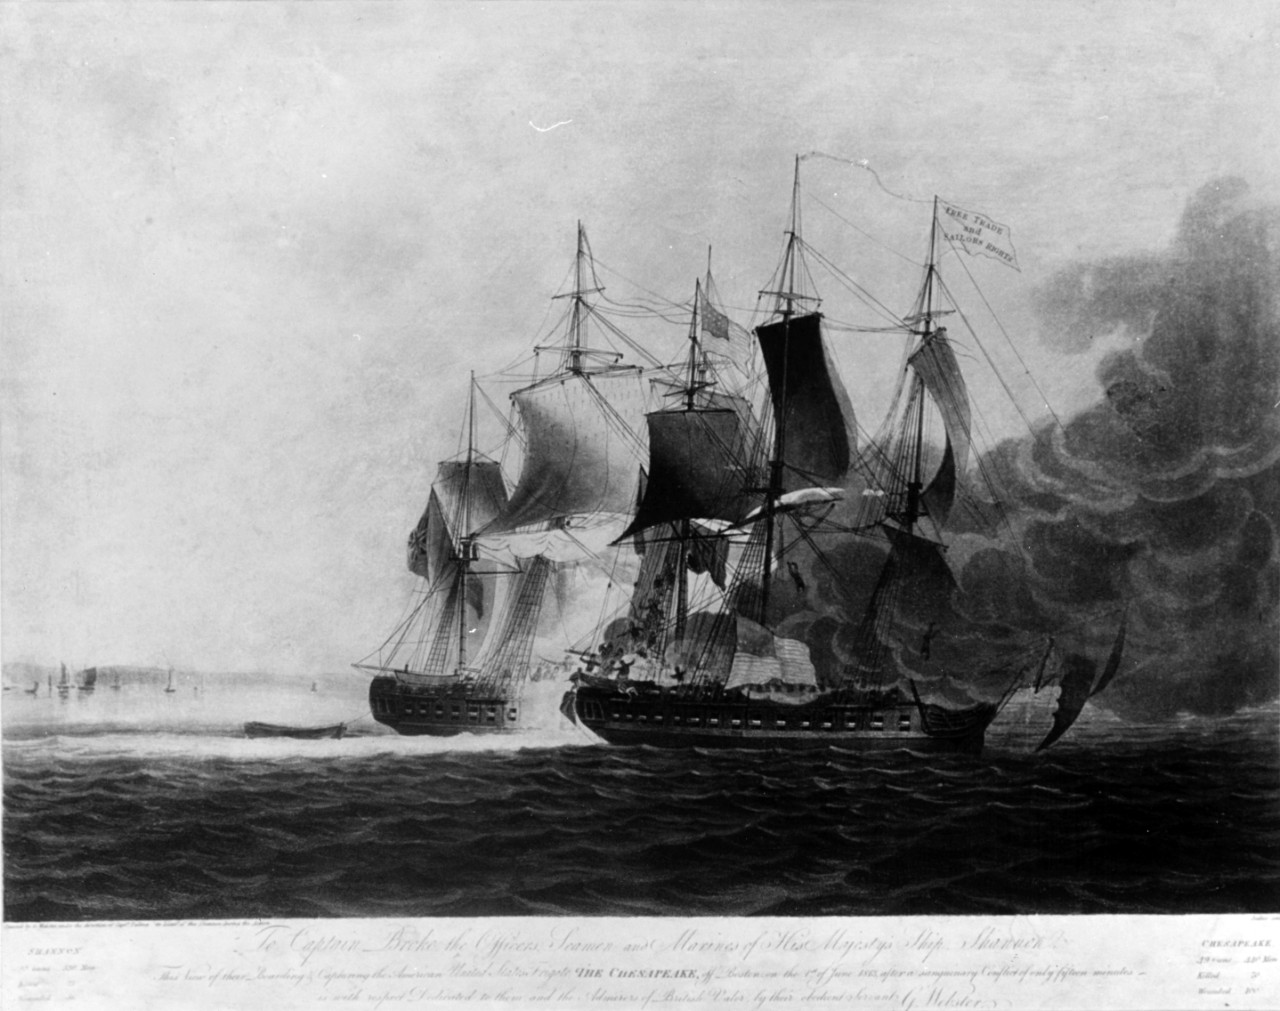 Photo #: NH 55248-KN Engagement between USS Chesapeake and HMS Shannon, 1 June 1813